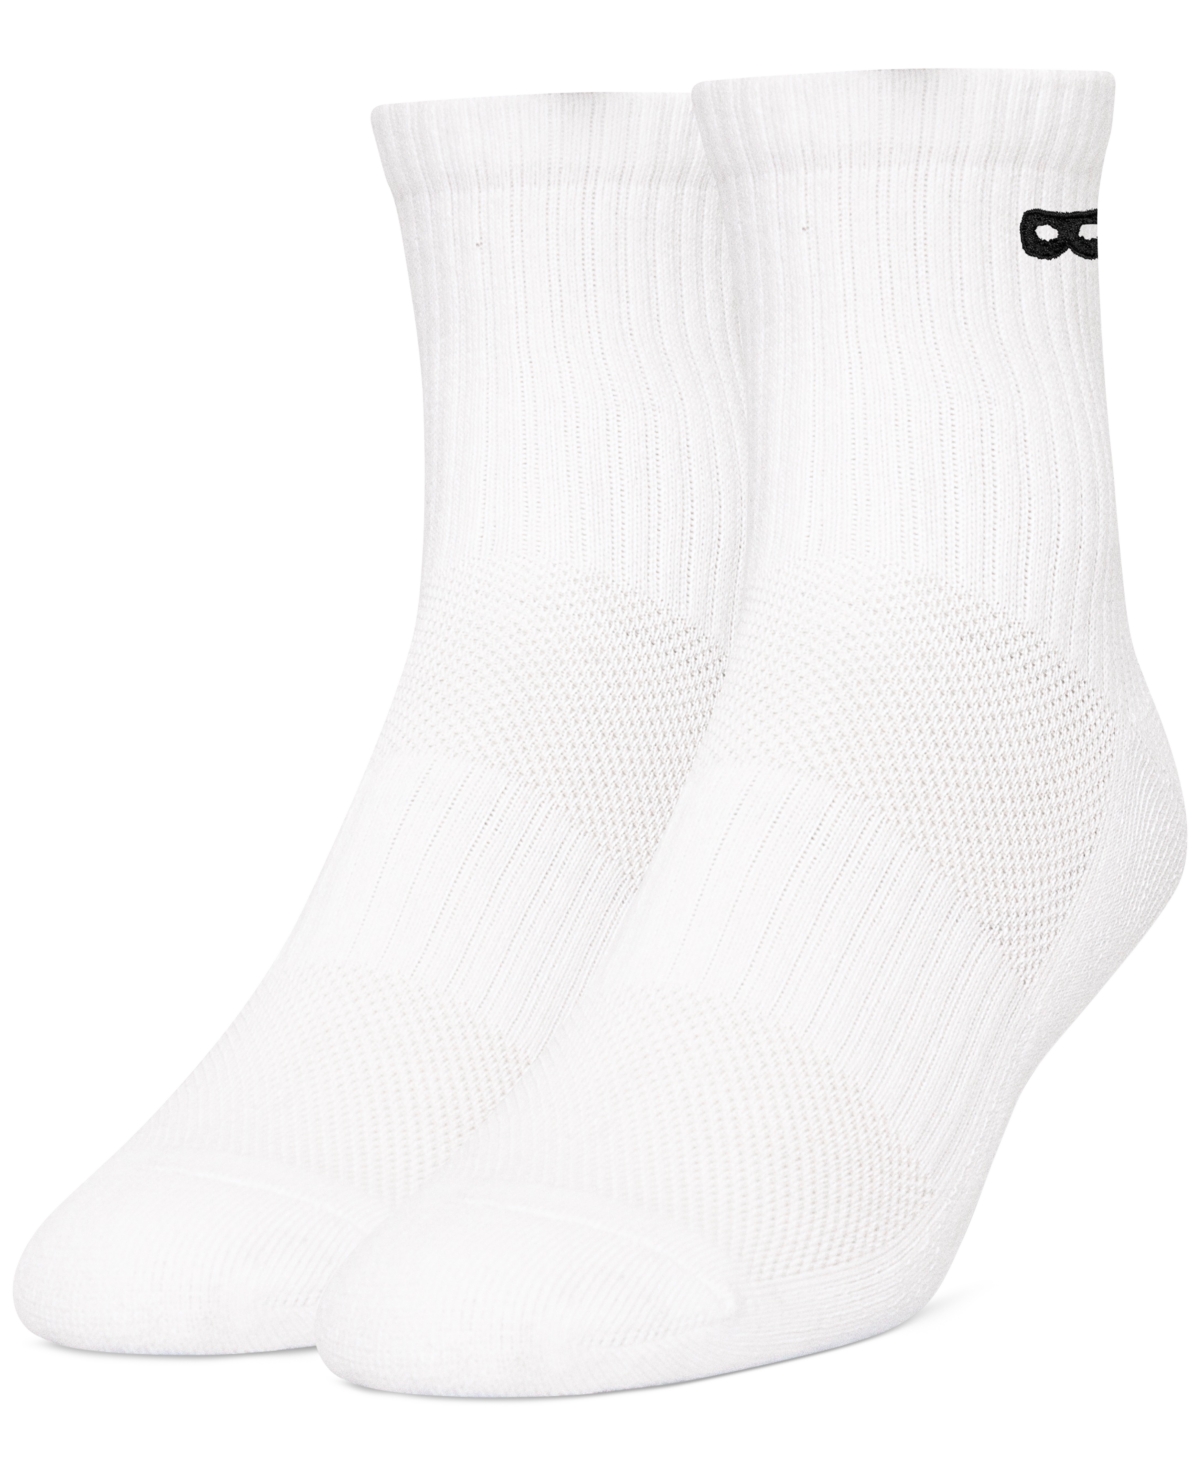 Pair Of Thieves Men's Cushion Cotton Ankle Socks 3 Pack In White